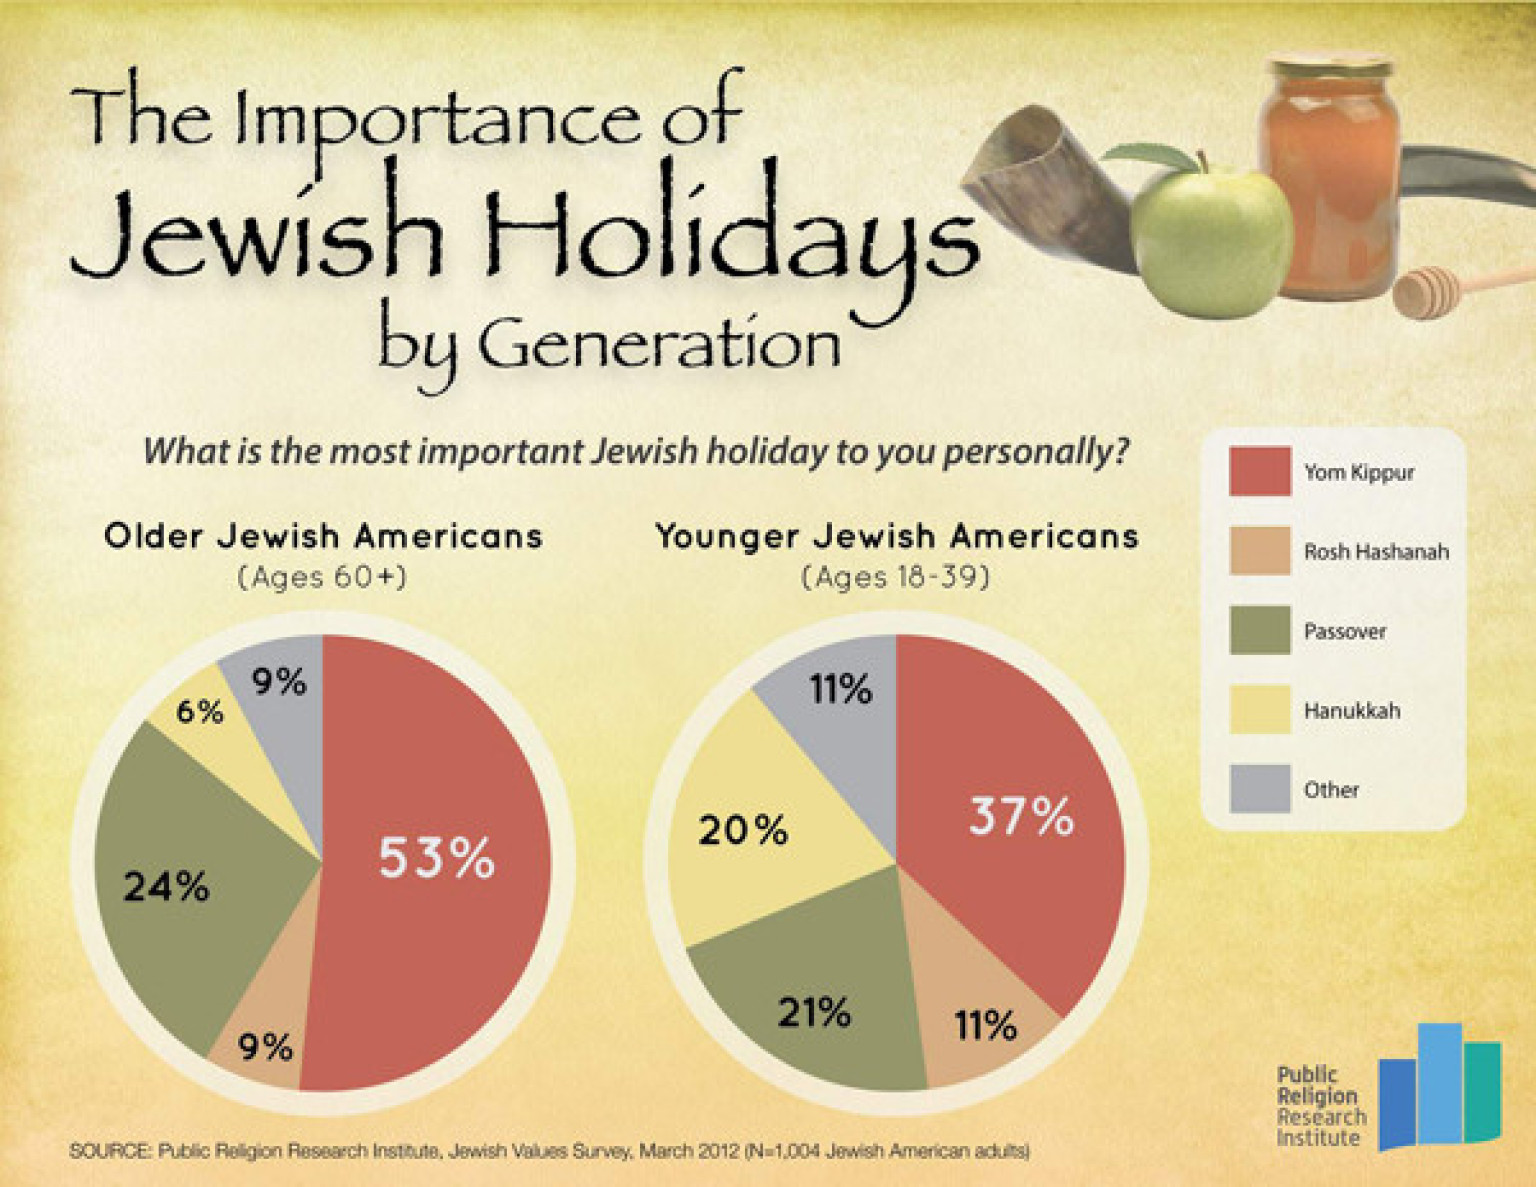 Passover Overtakes Yom Kippur As Most Meaningful Jewish Holiday For